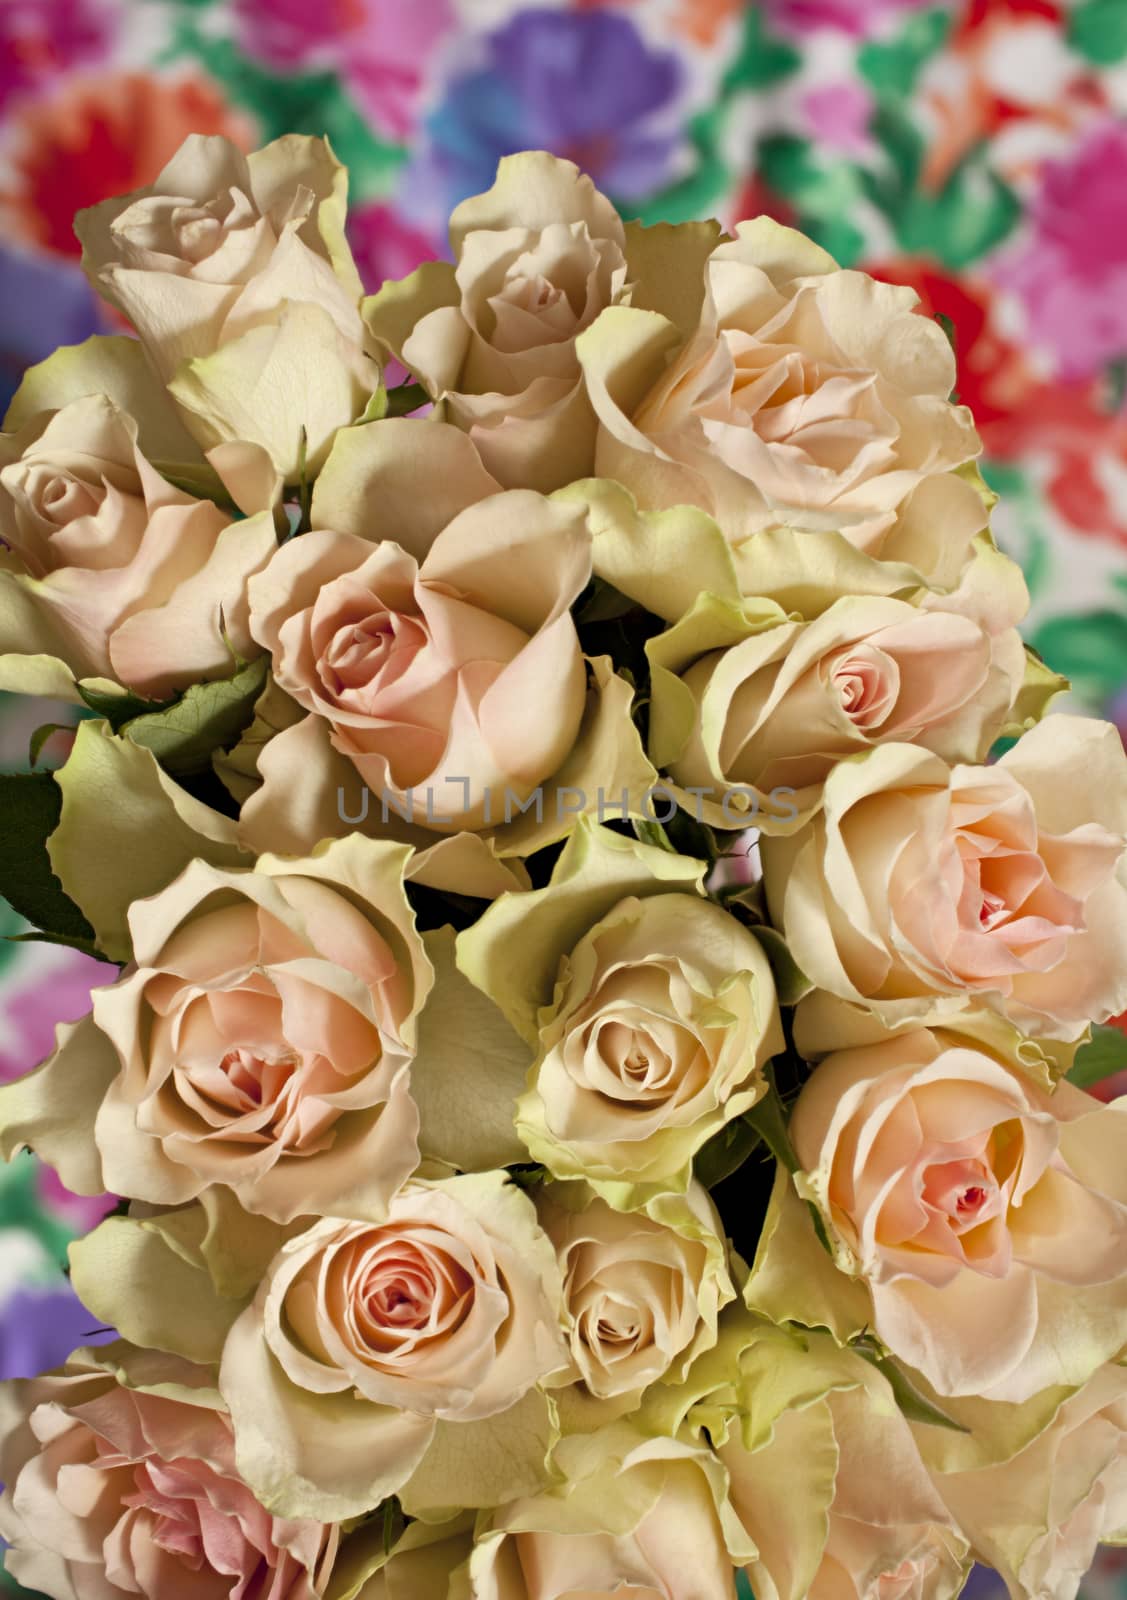 Flowers roses beautiful bouquet by mrivserg